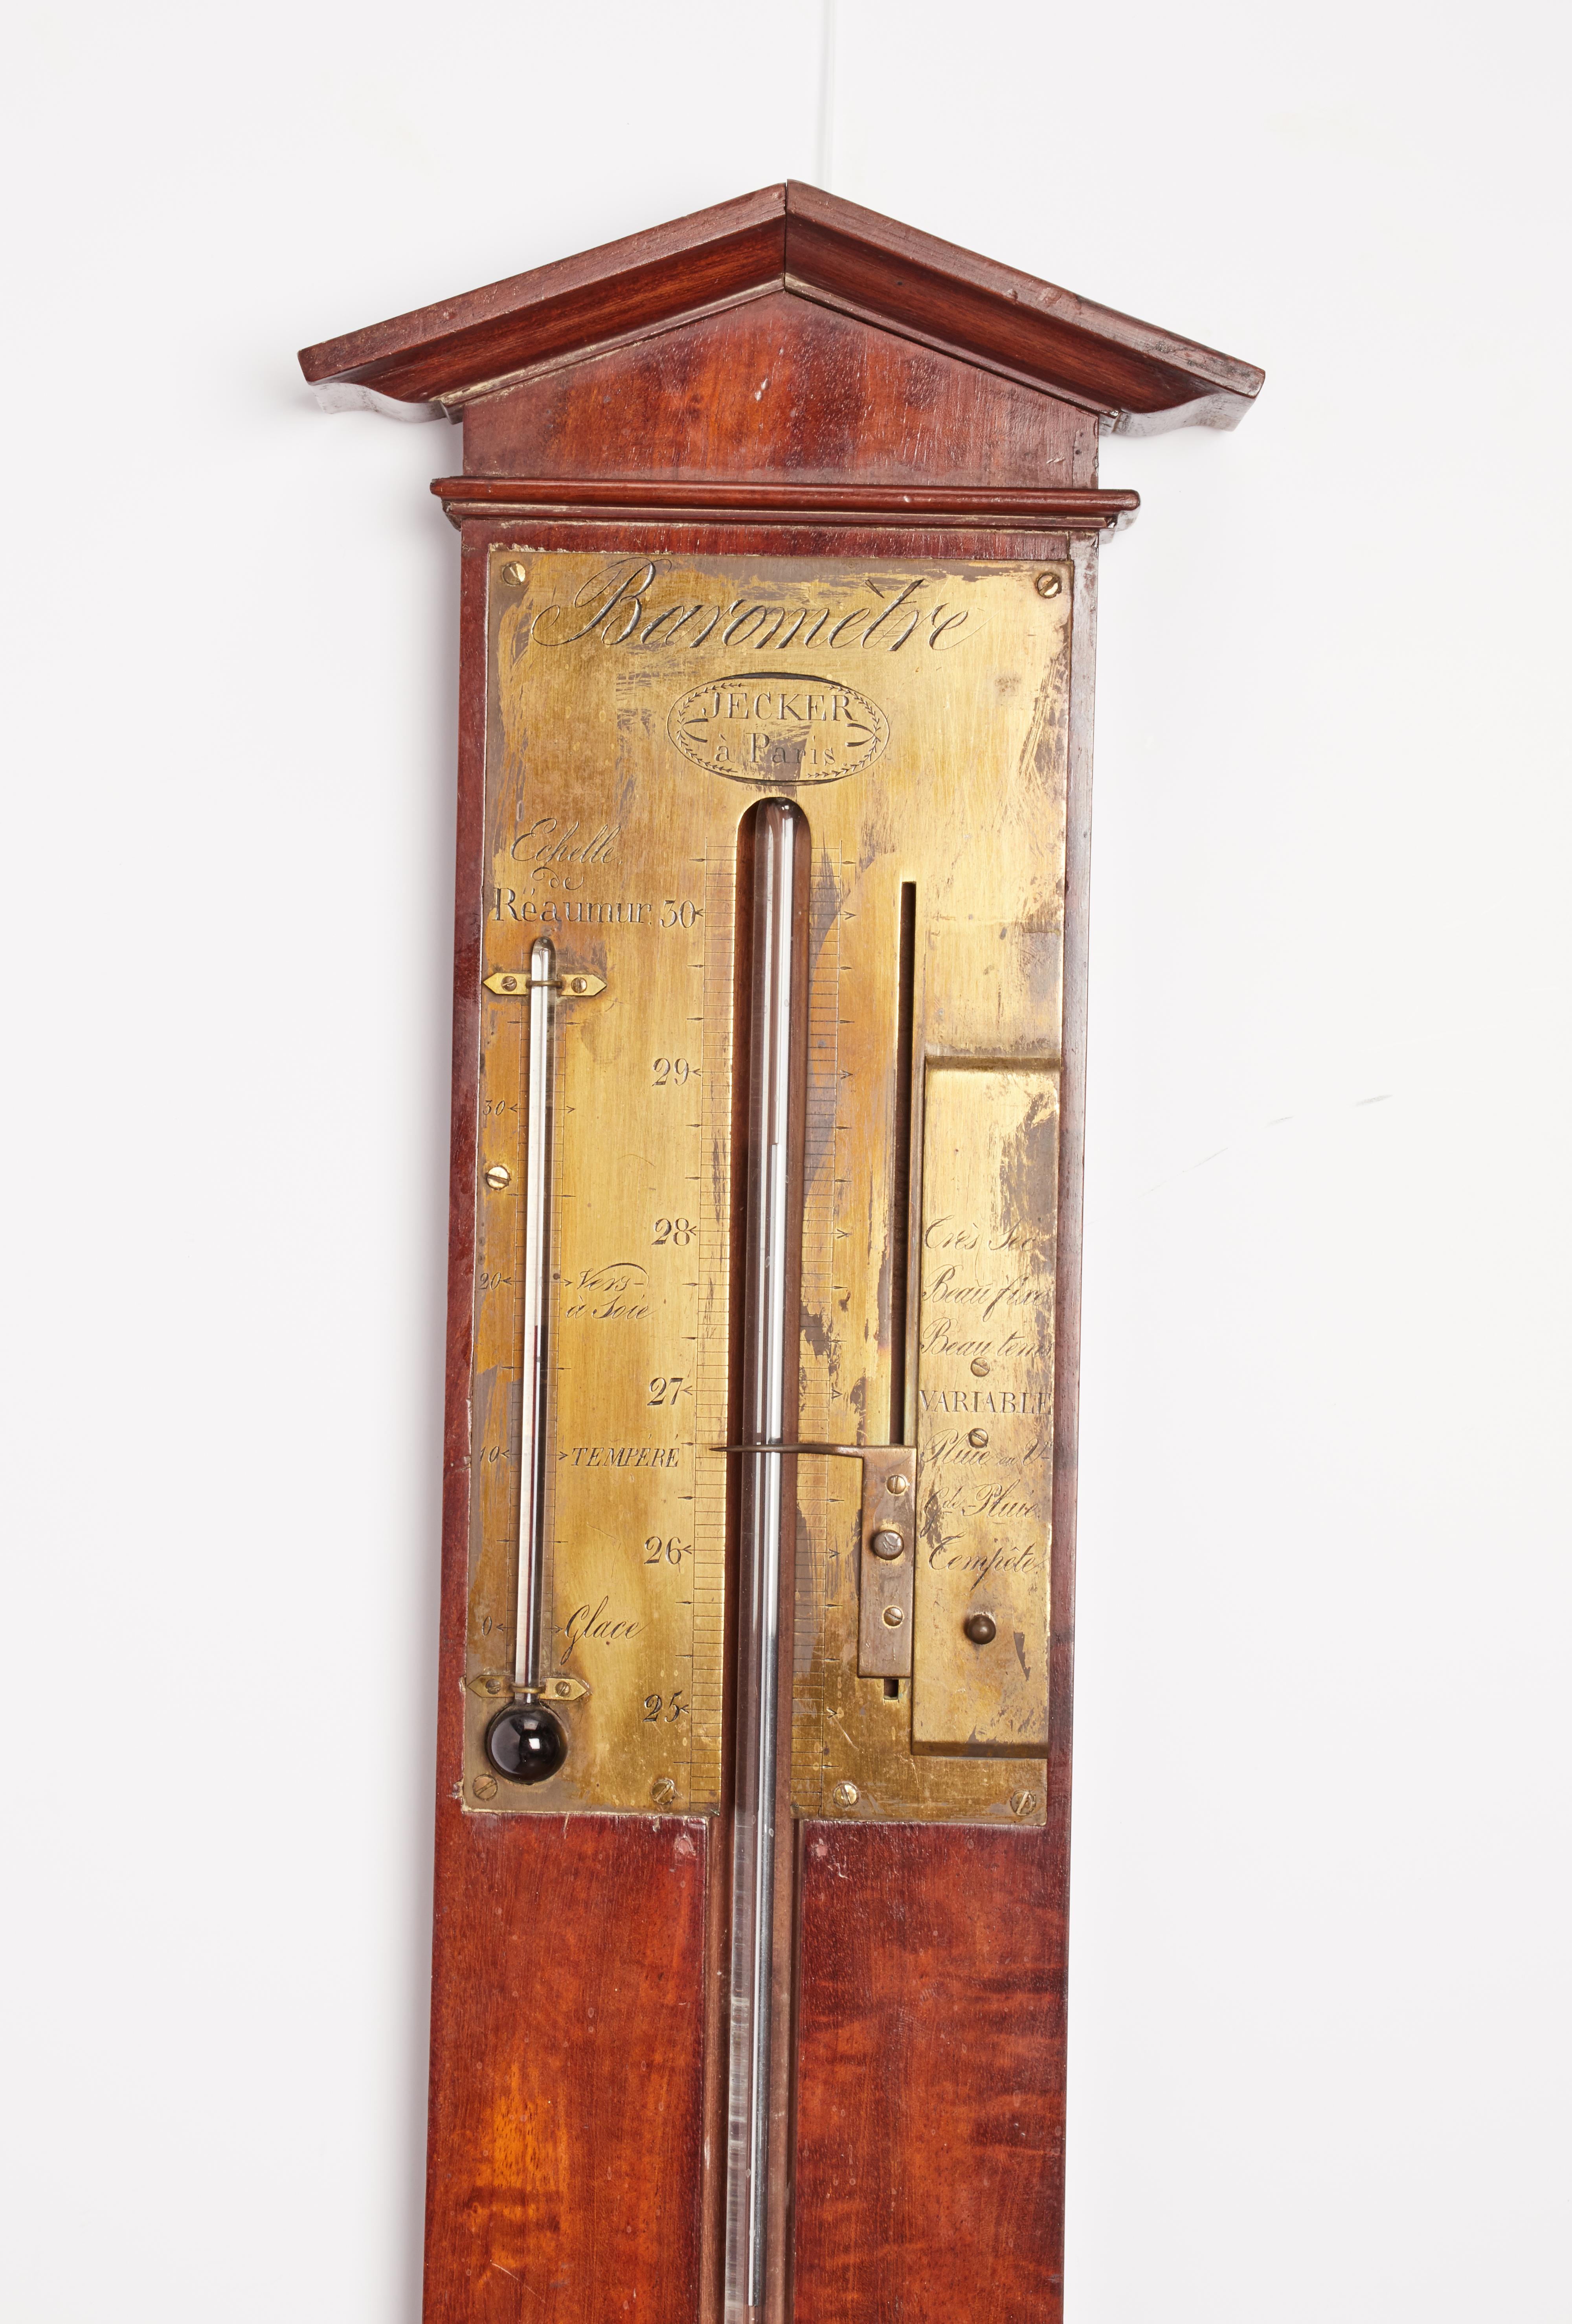 Mahogany wall barometer consisting of a glass tube containing mercury with its reserve.
On the top part a chevron shaped pediment and a screwed brass plate with a small alcohol thermometer and a mobile brass index for the barometer.
The brass